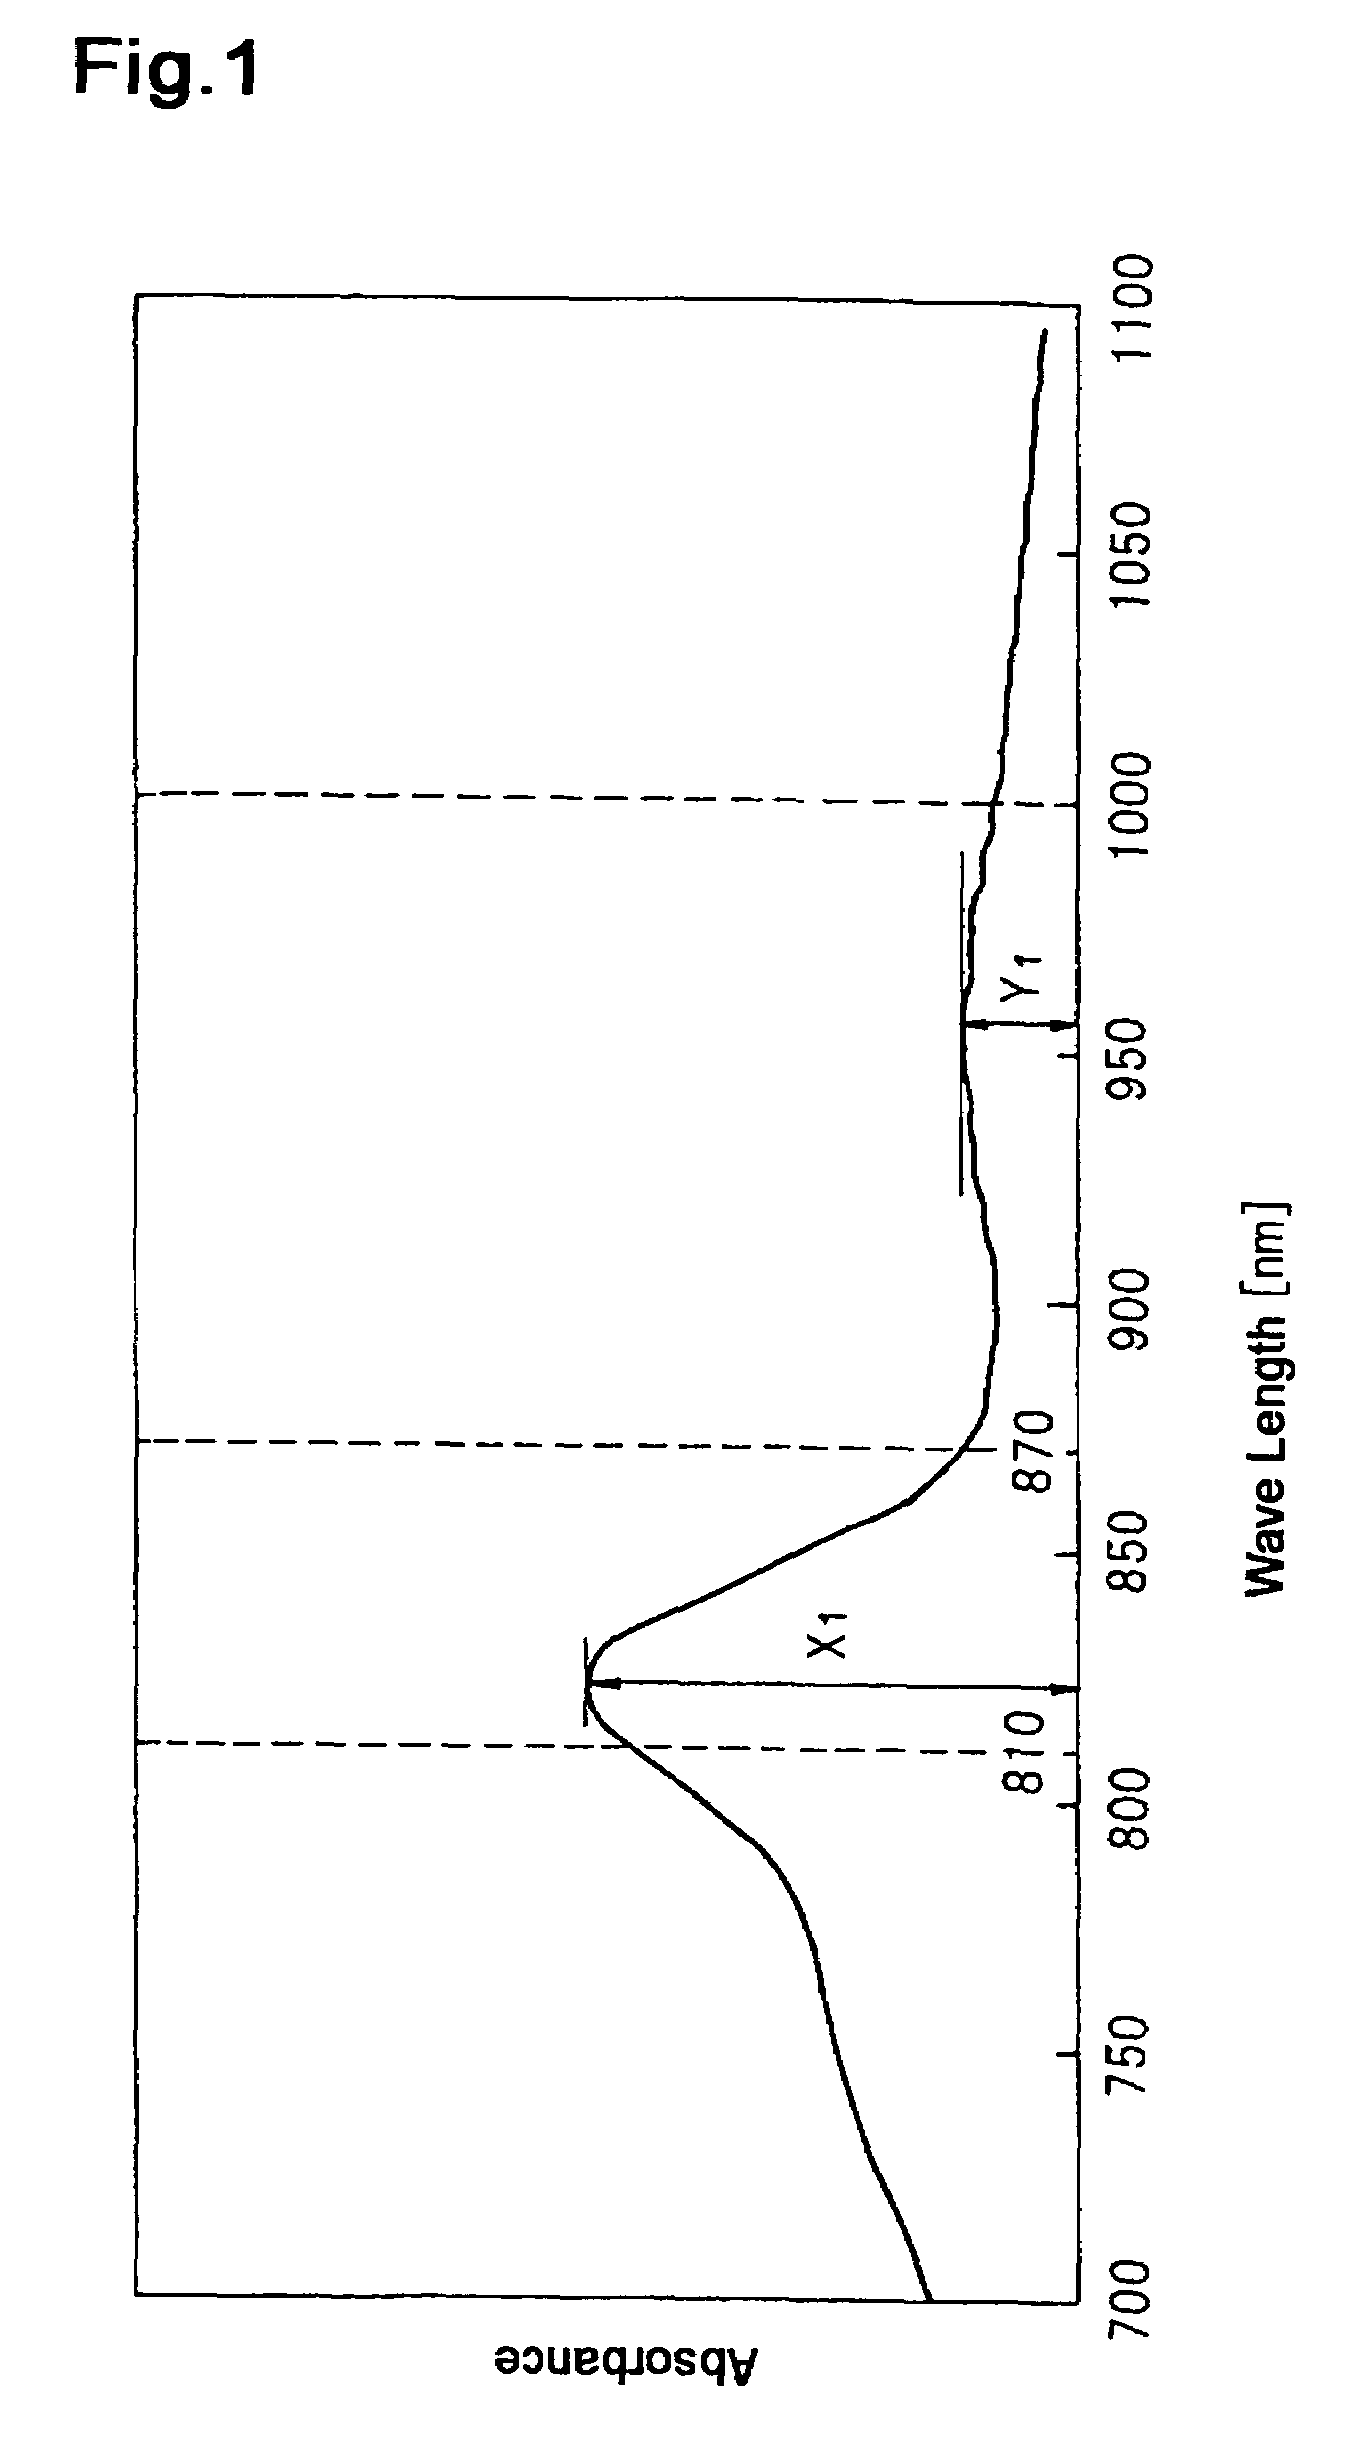 Non-contact heat fixing color toner and image-forming method